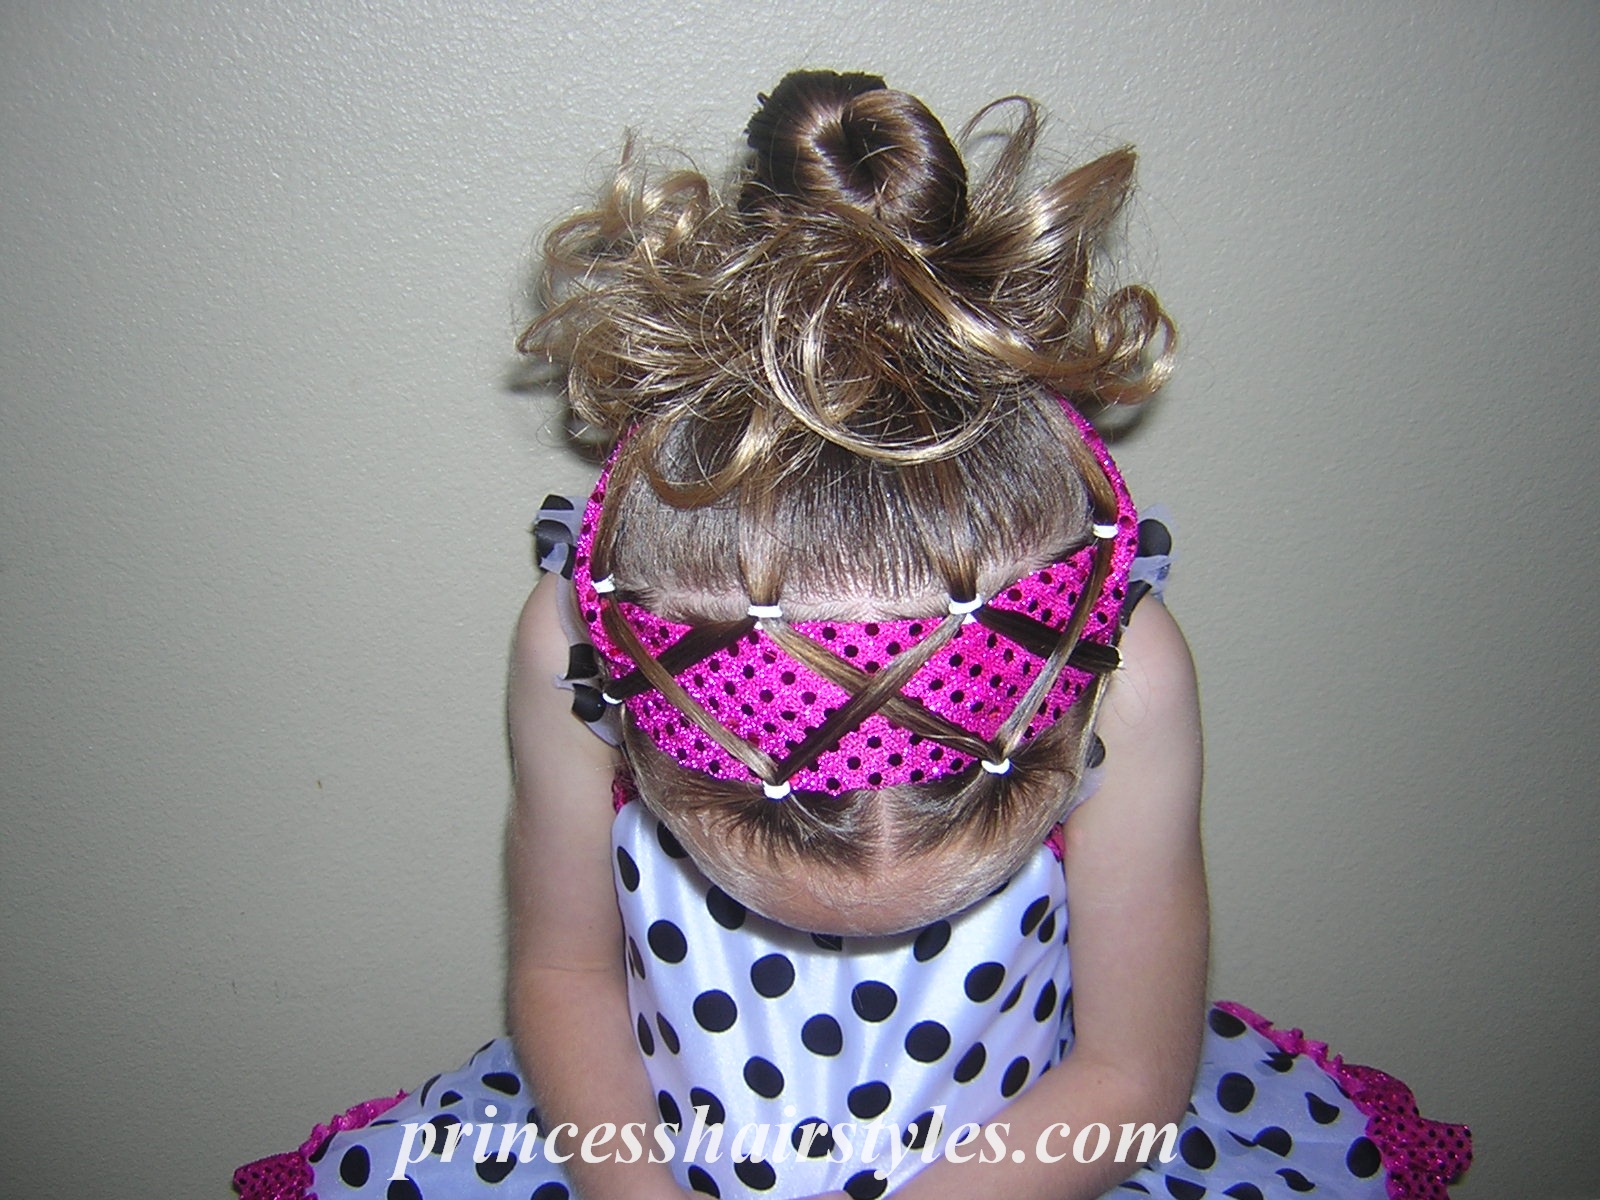 Hairstyles For Girls: Hairstyles for Dance Competition, Recital